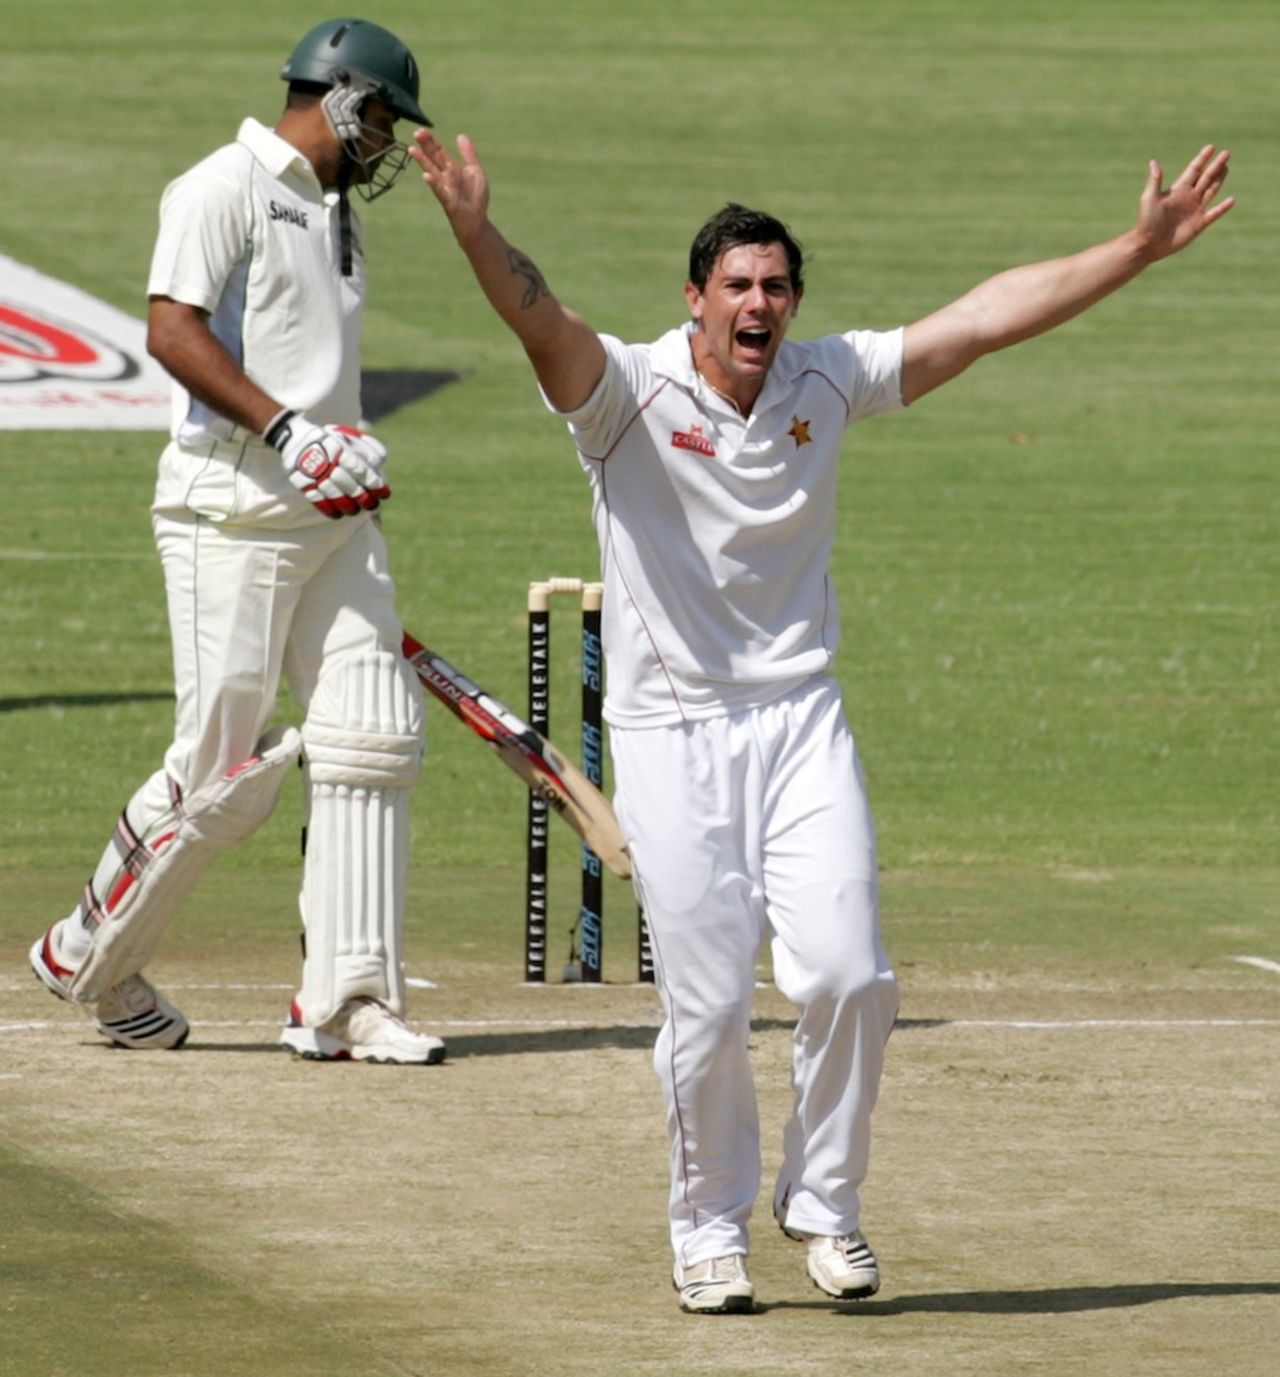 Keegan Meth appeals for a wicket, Zimbabwe v Bangladesh, 2nd Test, Harare, 2nd day, April 26, 2013